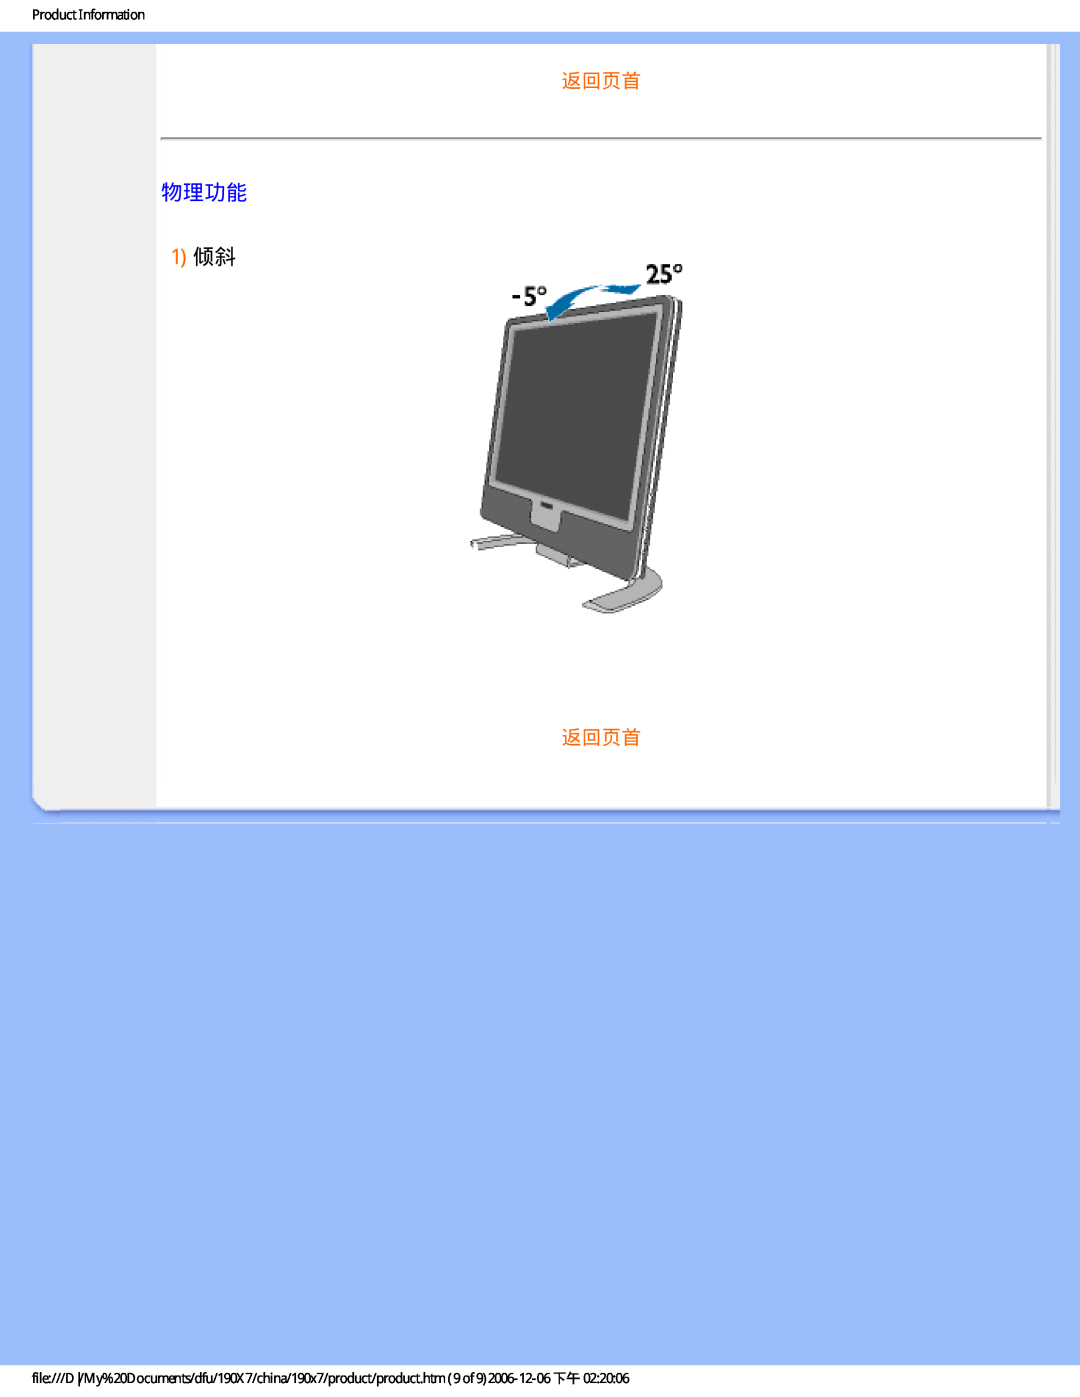 Philips 190X7 user manual 物理功能, 返回页首, Product Information 